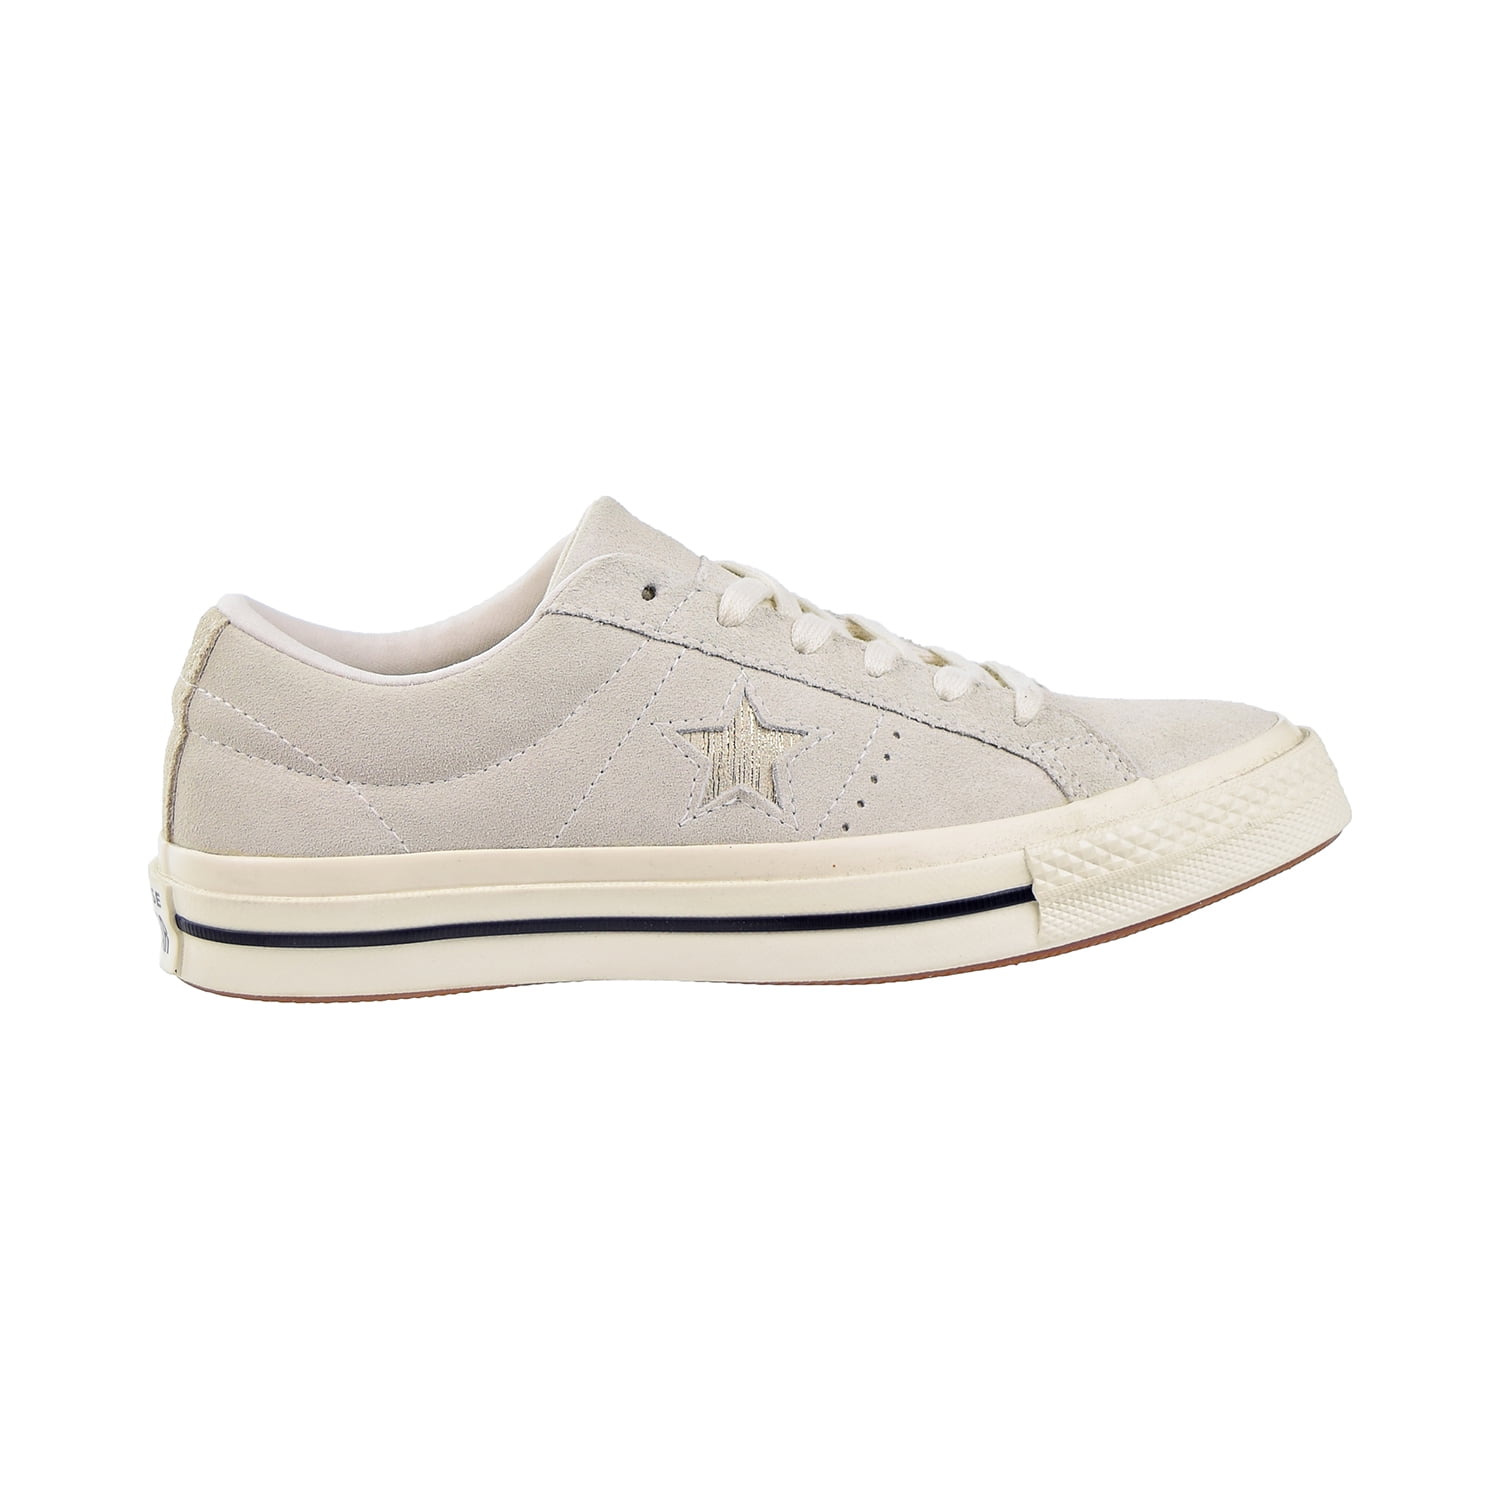 Converse One Star OX Mens Shoes Egret 